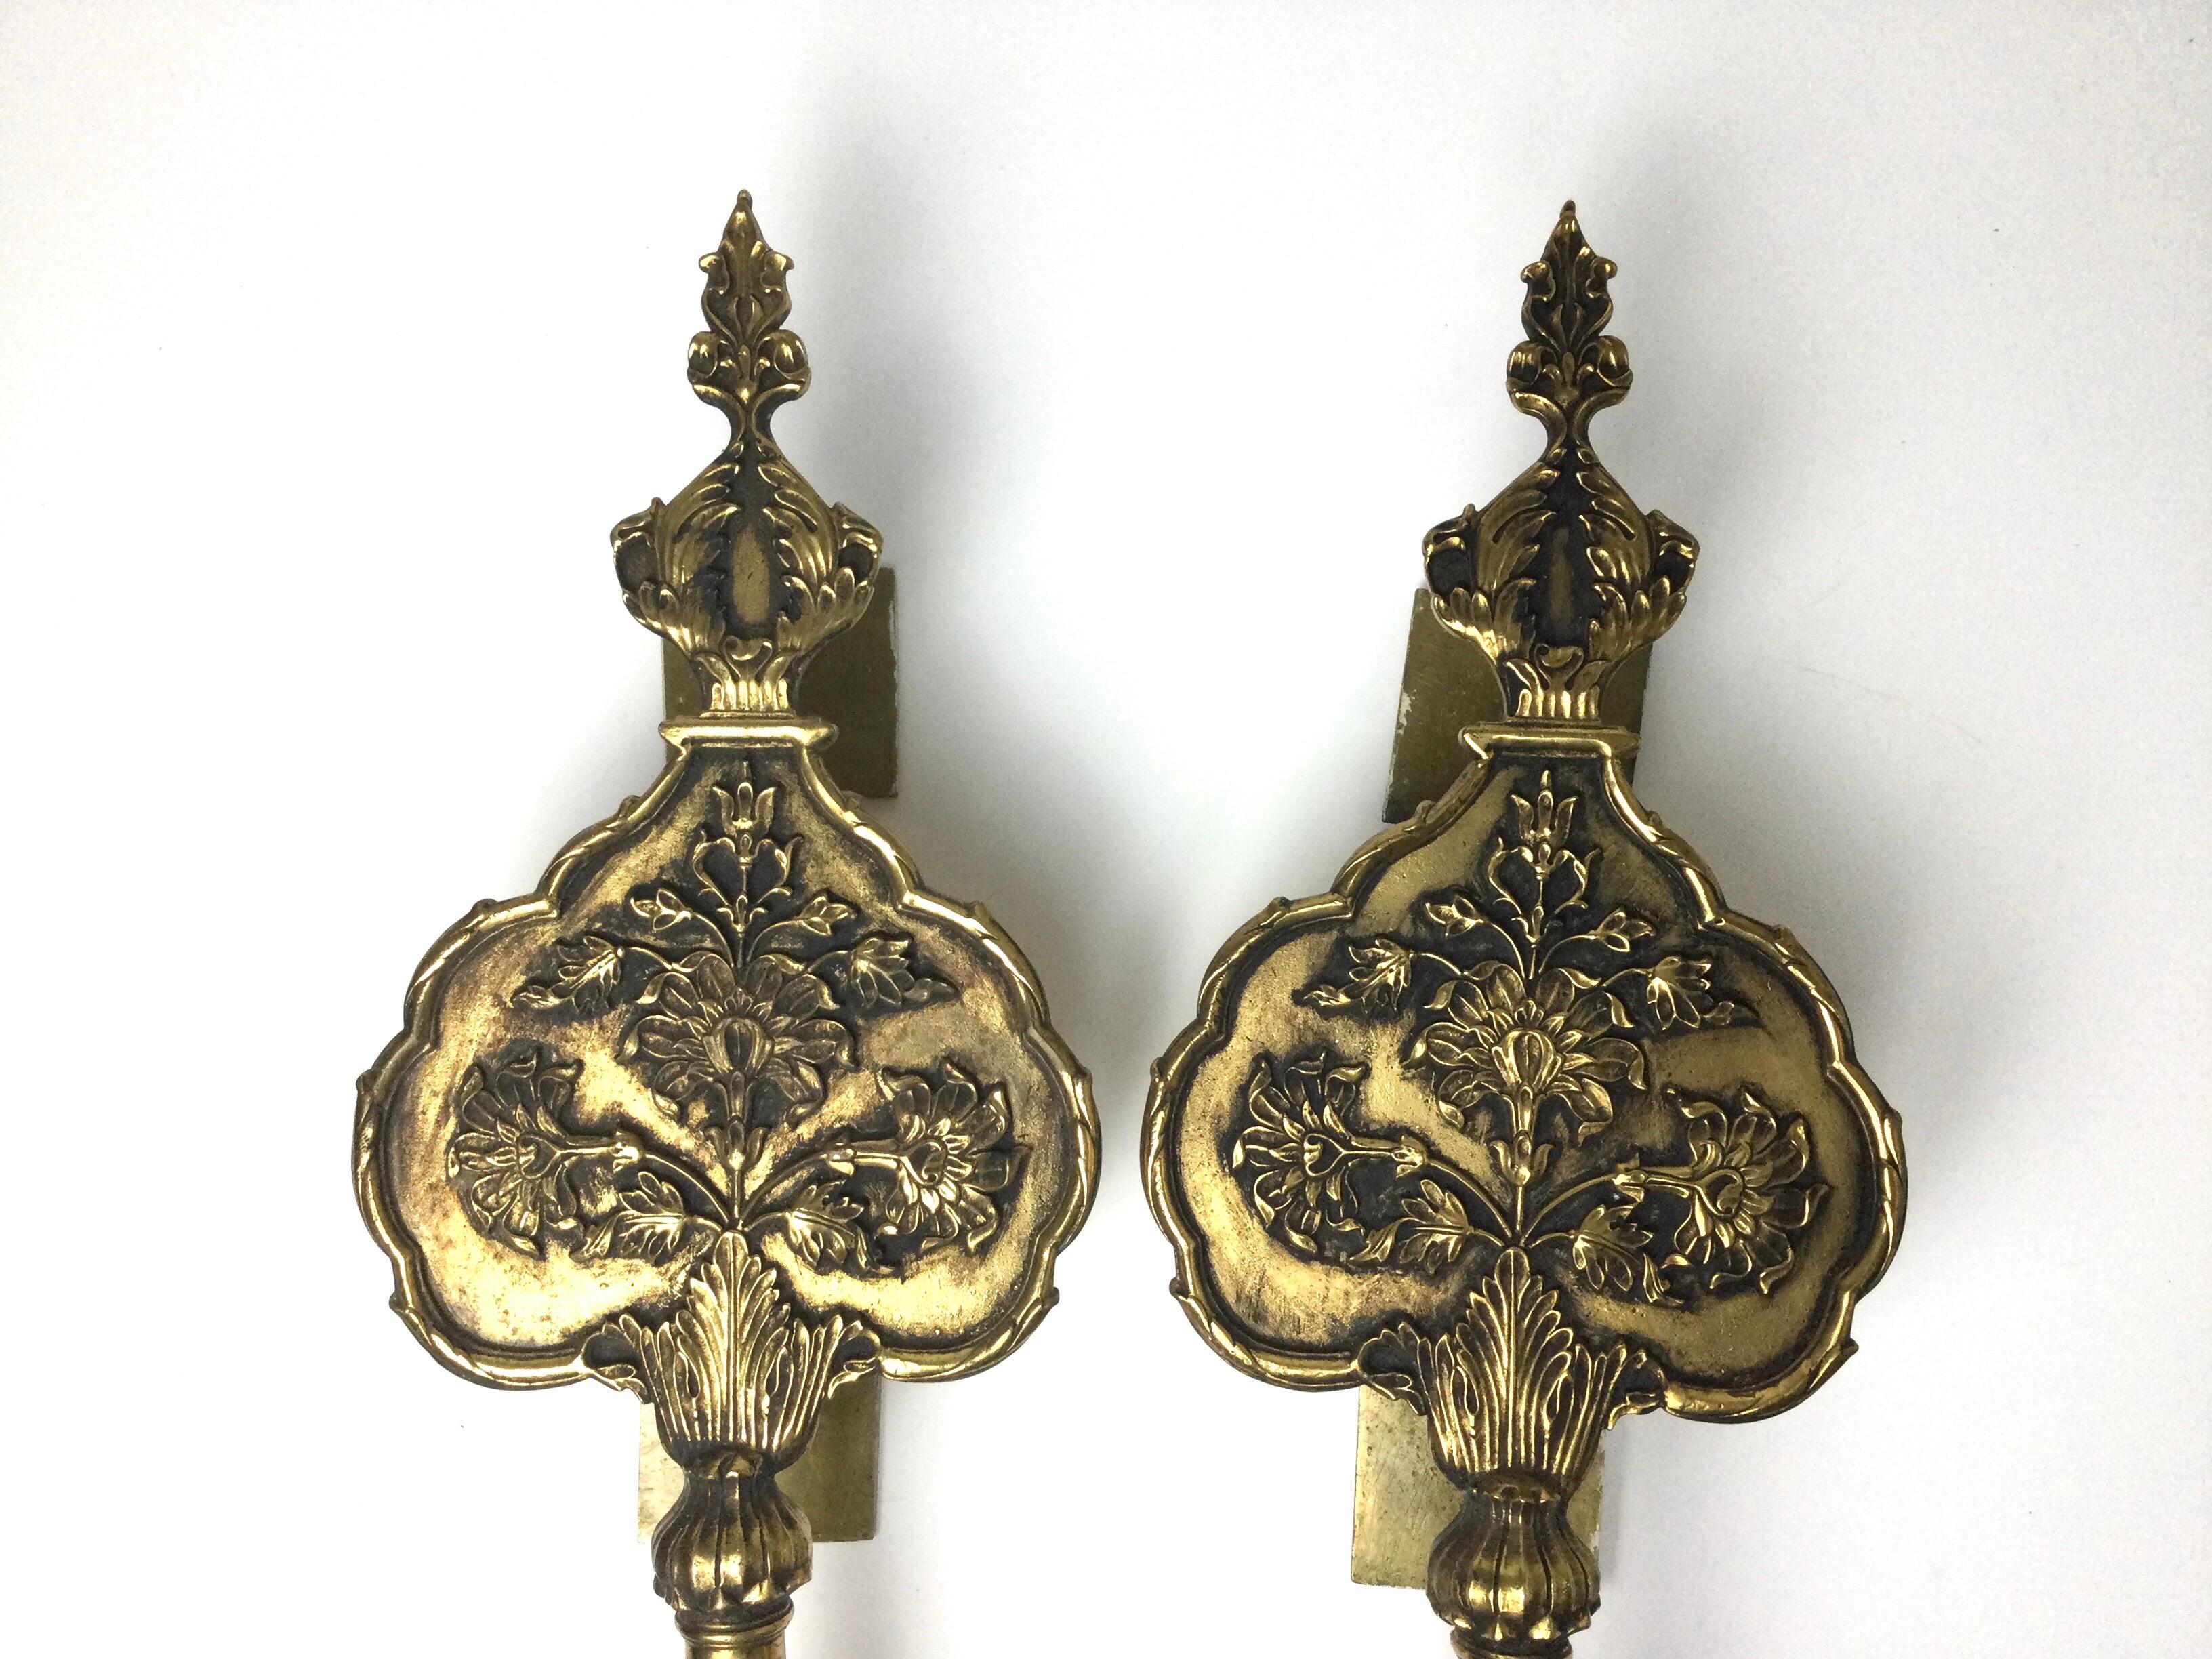 Pair of mid-century oversized 1950's brass door pulls. Came of a pair of double closet doors in a 1950's house that was beeping remodeled. 17 1/4